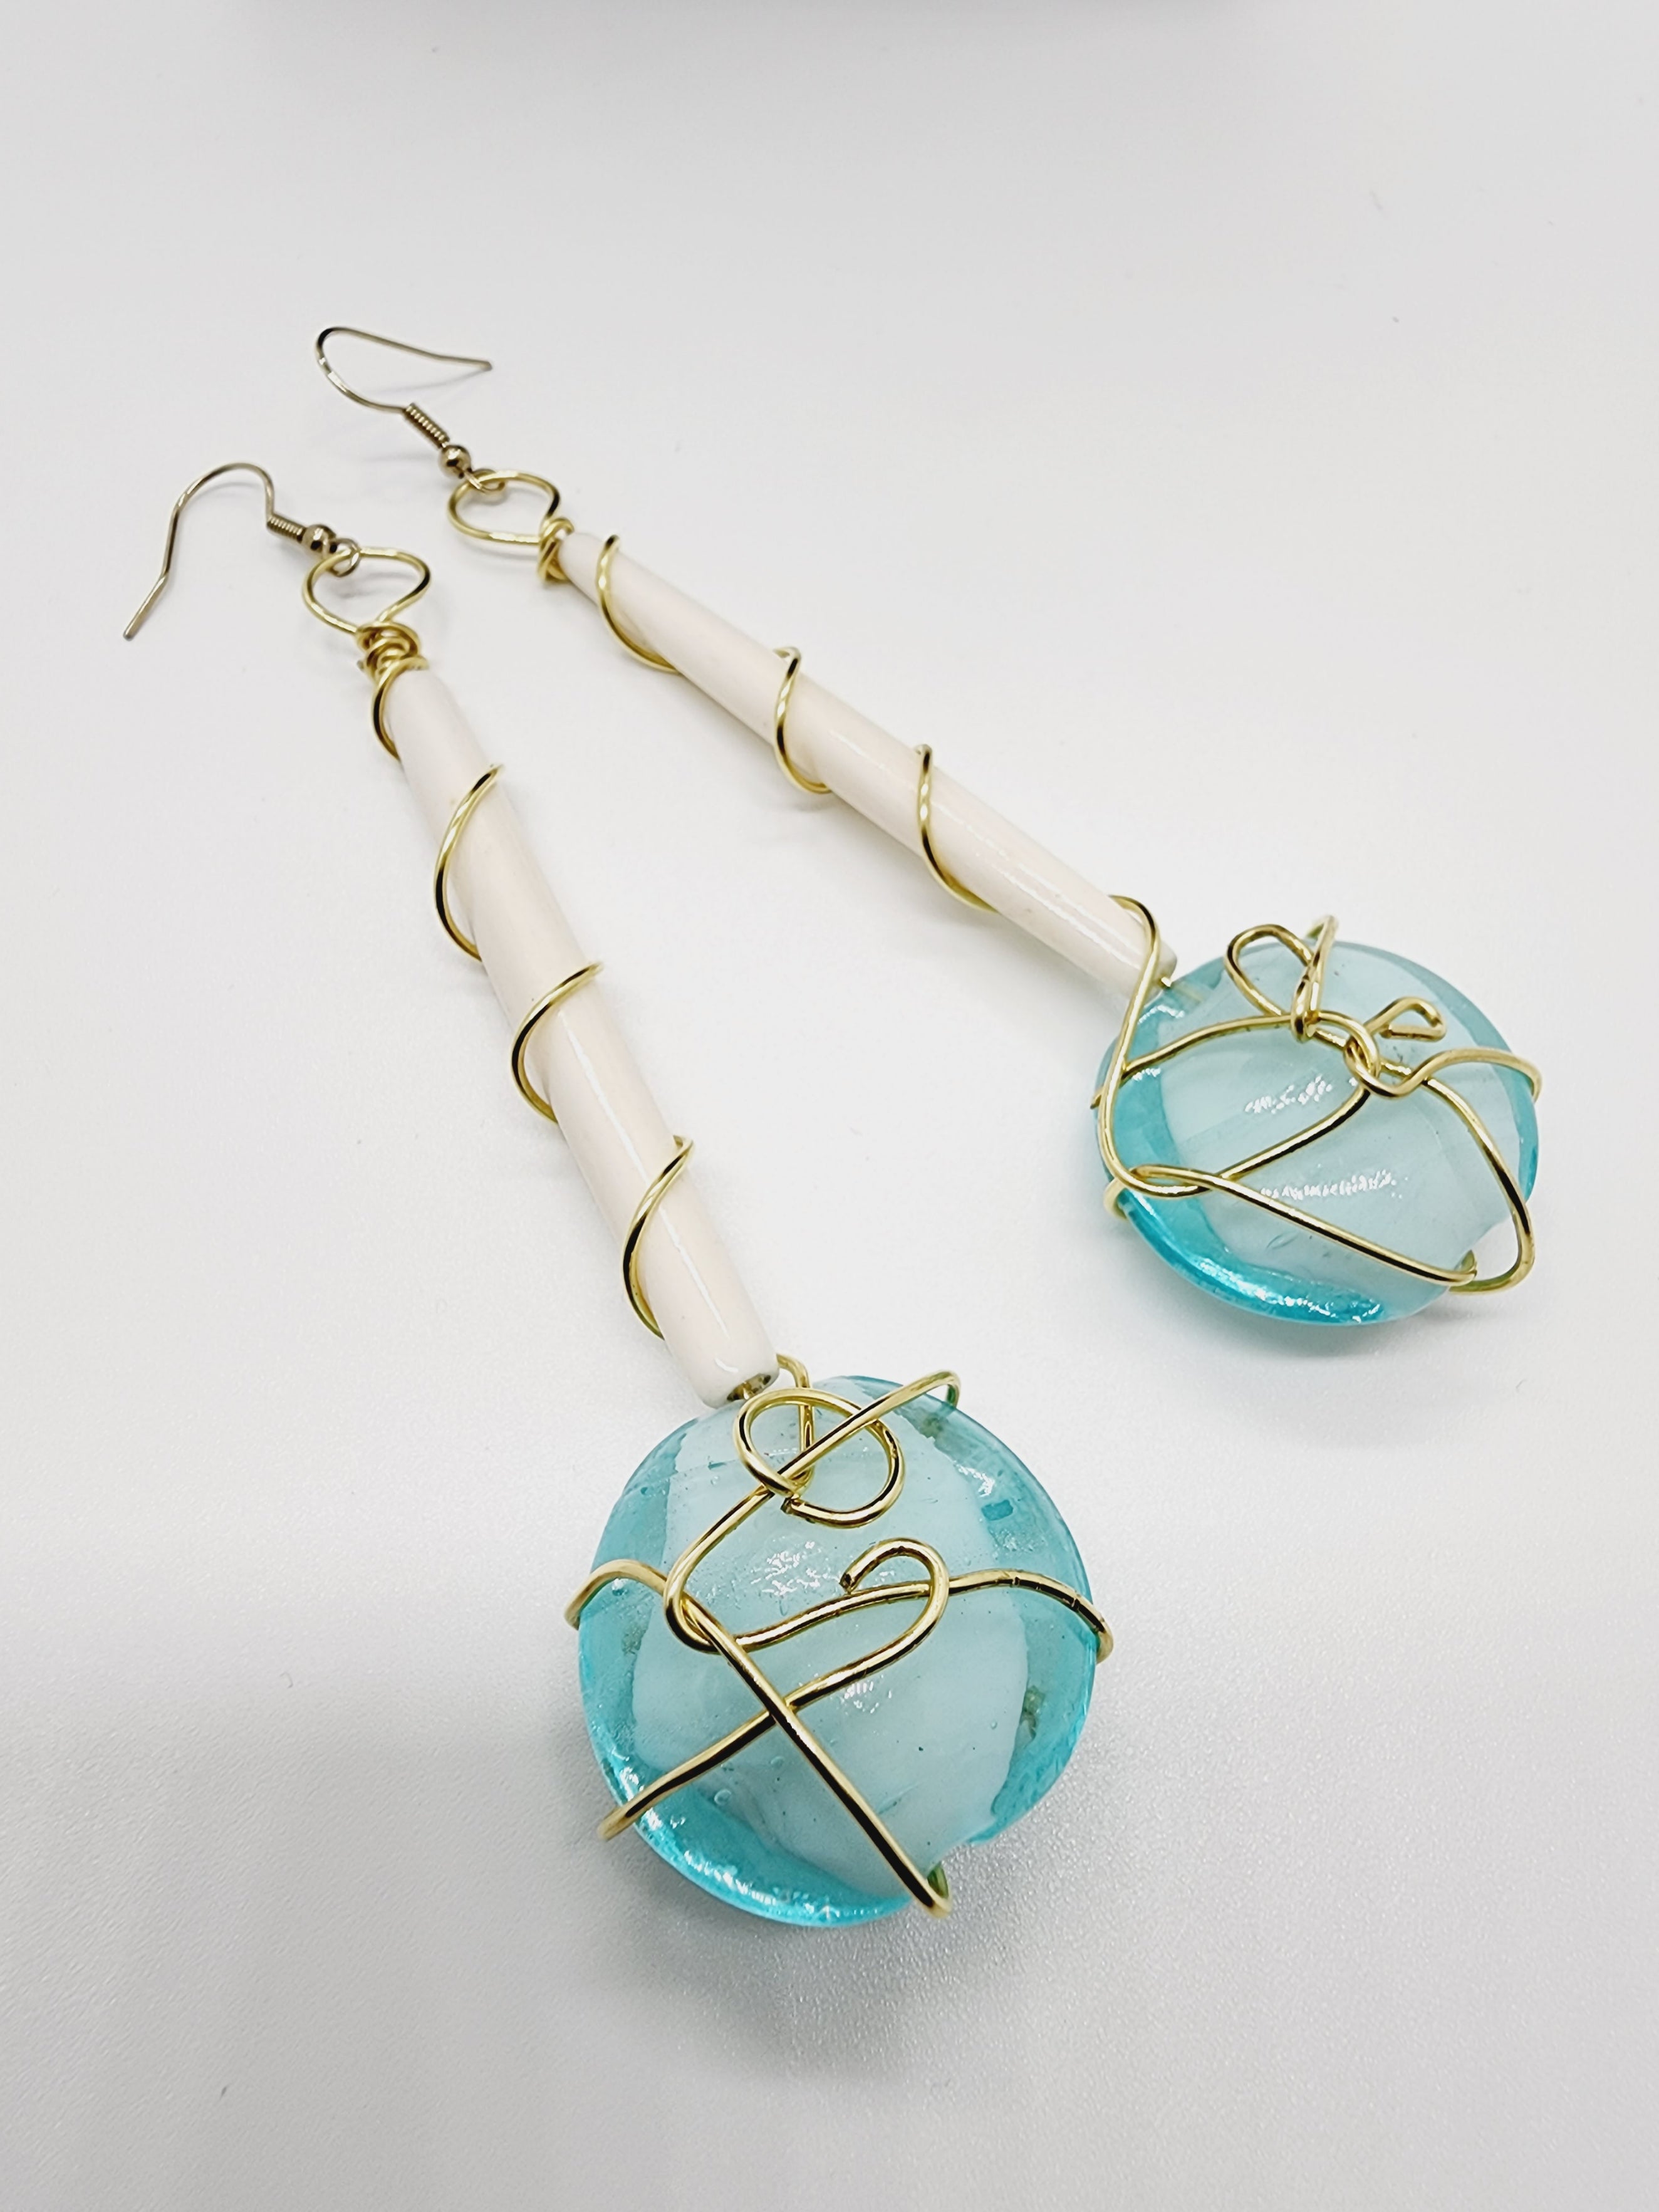 Length: 4.75 inches | Weight: 1.3 ounces  Distinctly You! These handmade earrings are made using white Batik bone tube, gold wire wrapping, Italian Murano aqua glass, and hypoallergenic hooks with back closures. 